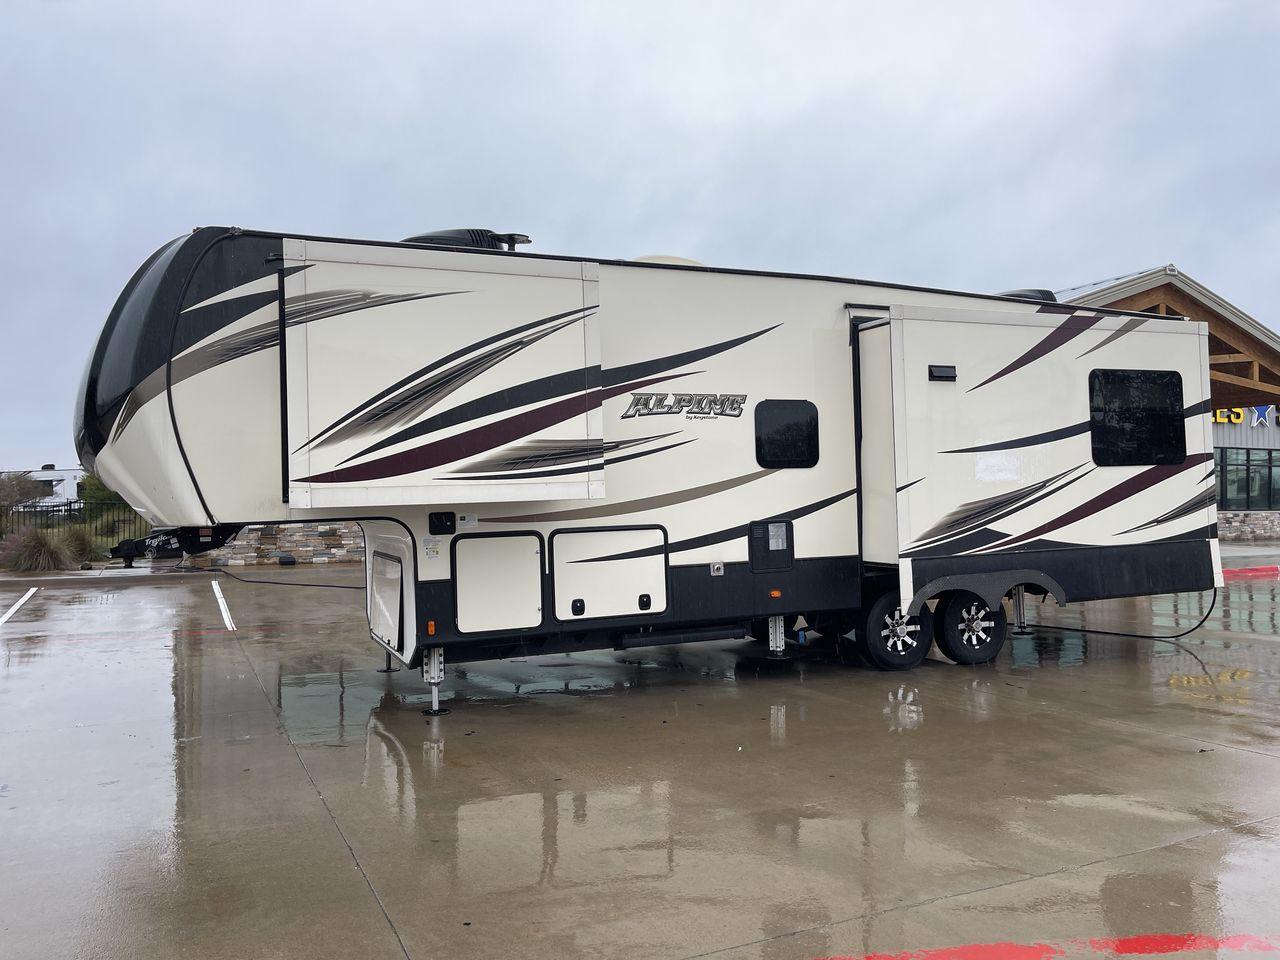 2018 KEYSTONE ALPINE 3011RE (4YDF30127JE) , Length: 34.08 ft. | Dry Weight: 11,945 lbs. | Gross Weight: 15,000 lbs. | Slides: 3 transmission, located at 4319 N Main St, Cleburne, TX, 76033, (817) 678-5133, 32.385960, -97.391212 - The definition of luxury travel comes with the 2018 Keystone Alpine 3011RE. This is an opulent fifth-wheel trailer designed for discerning adventurers. Spanning 34 feet, this exquisite model boasts three slide-outs, creating a sprawling interior that redefines comfort on the road. The master bedroom - Photo #24